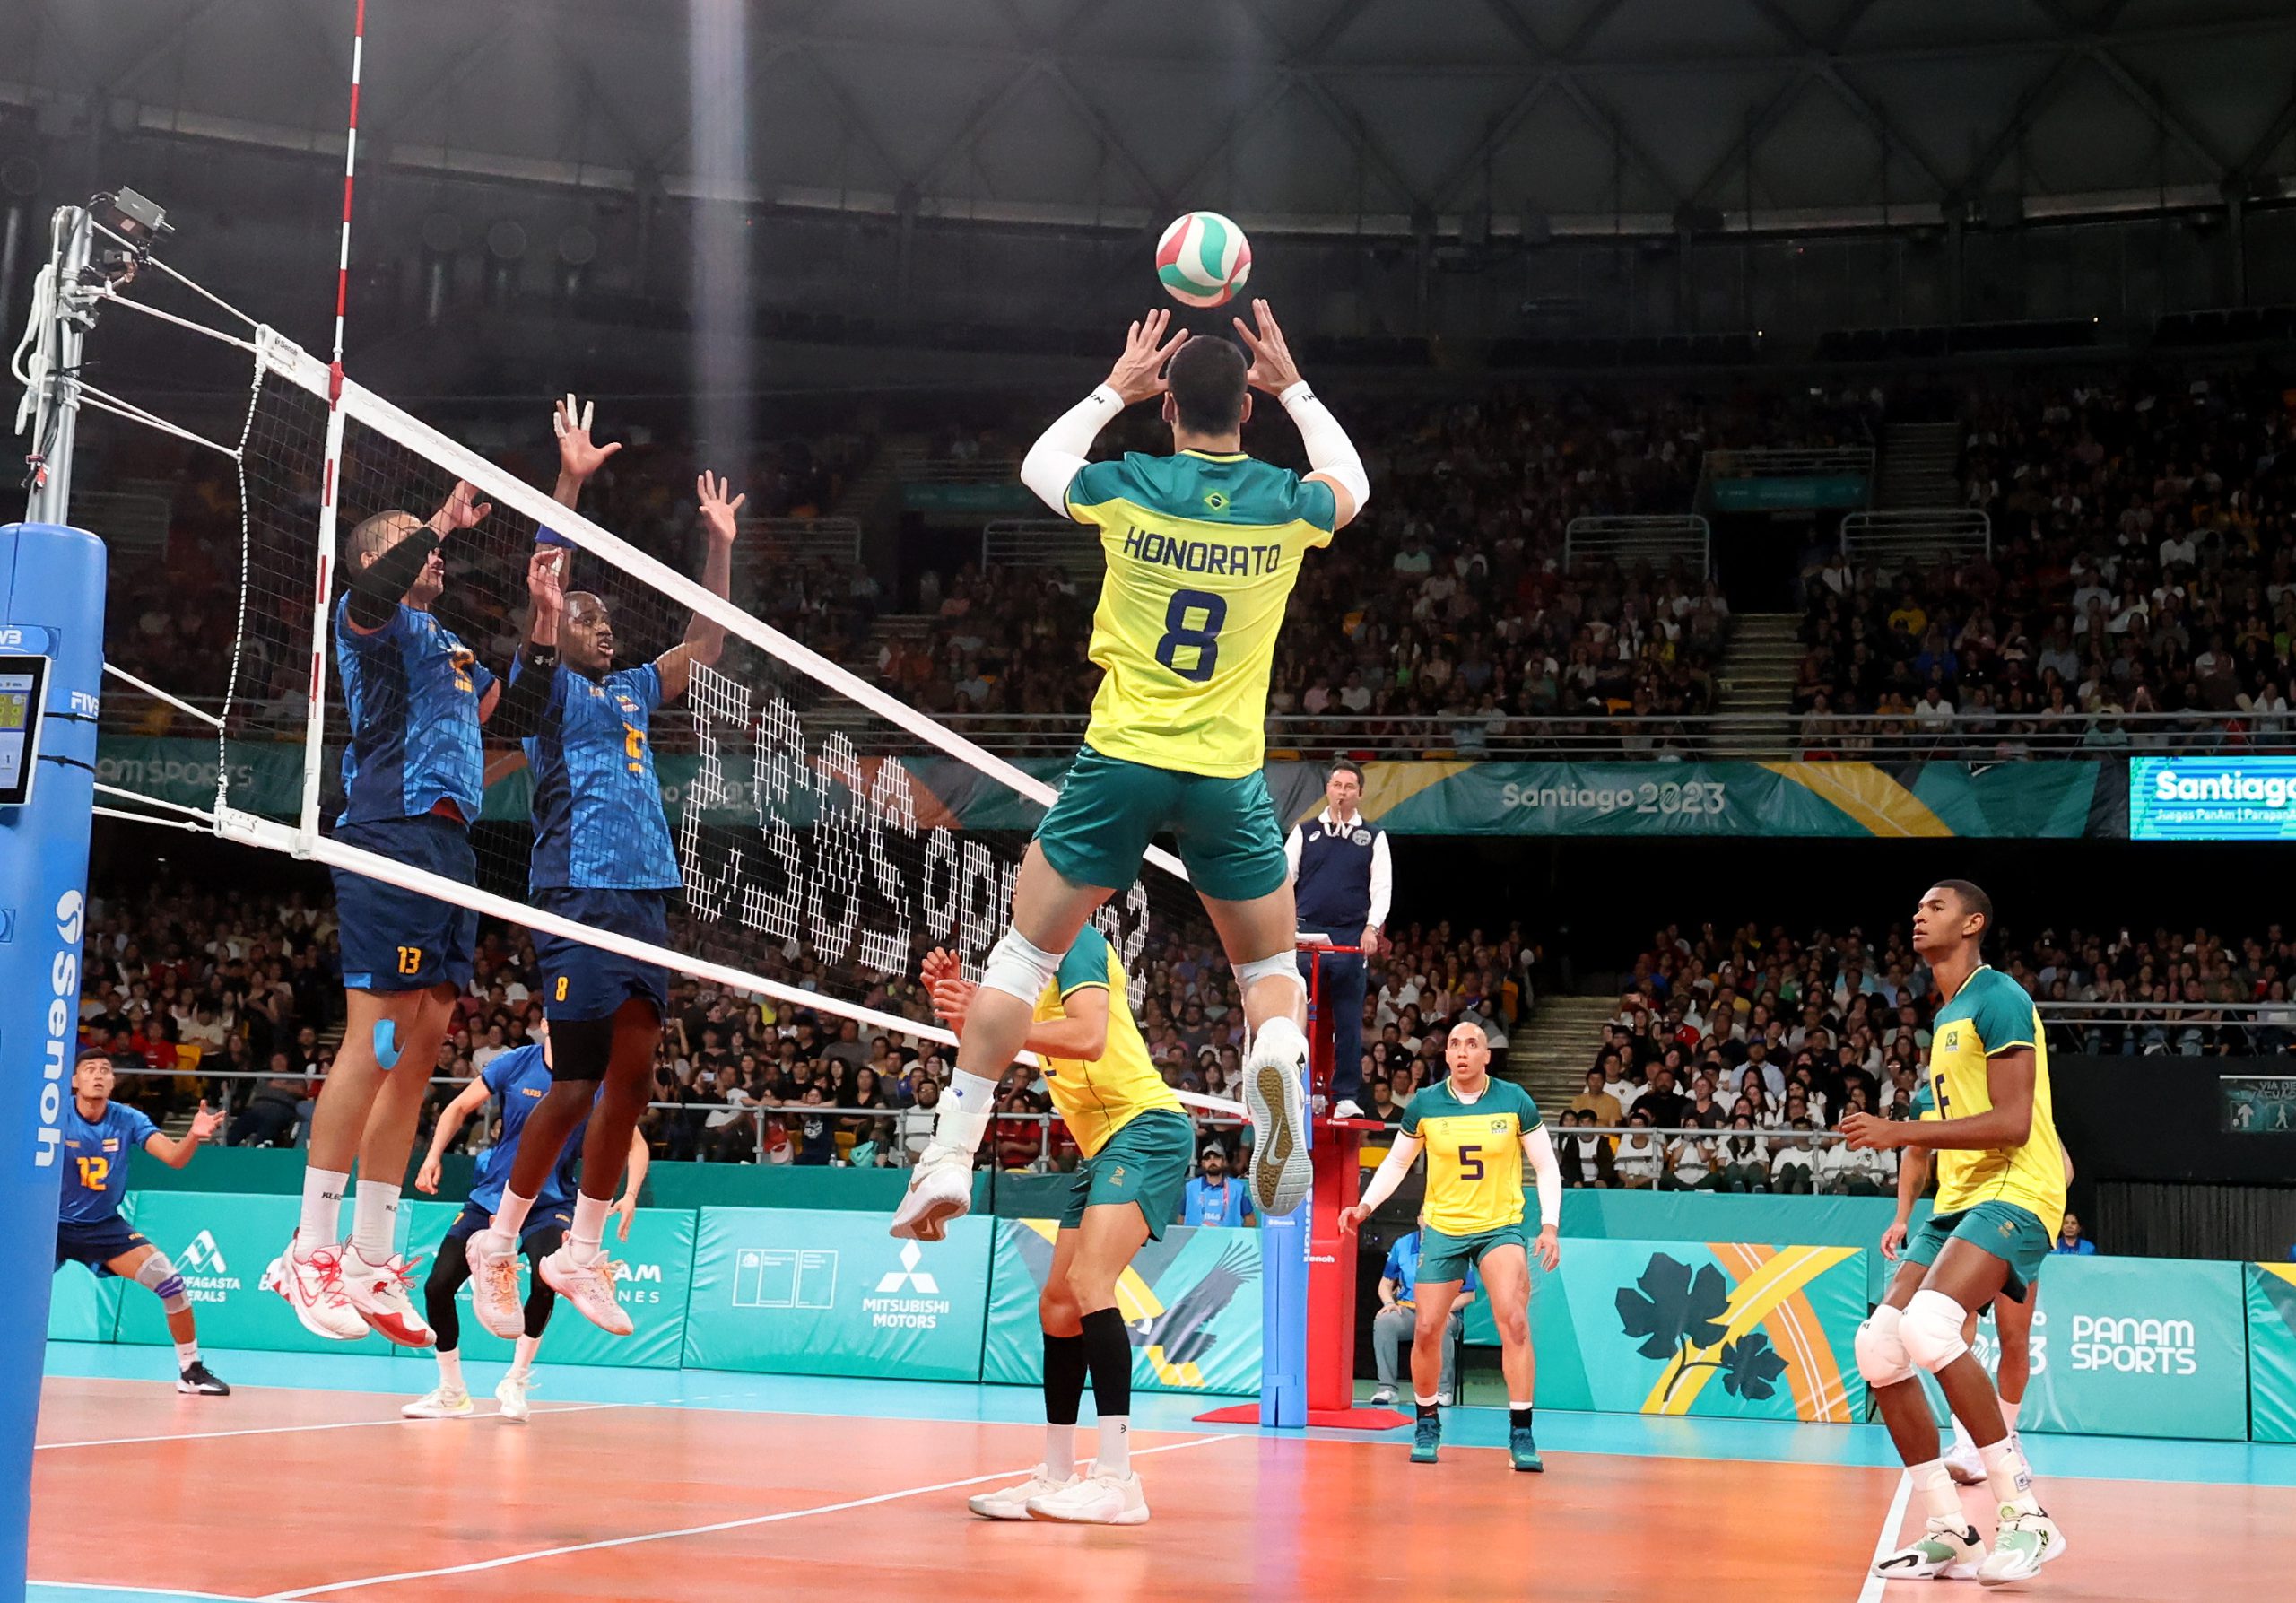 Brazil wins in semis to Colombia and will face Argentina for Santiago 2023 Title